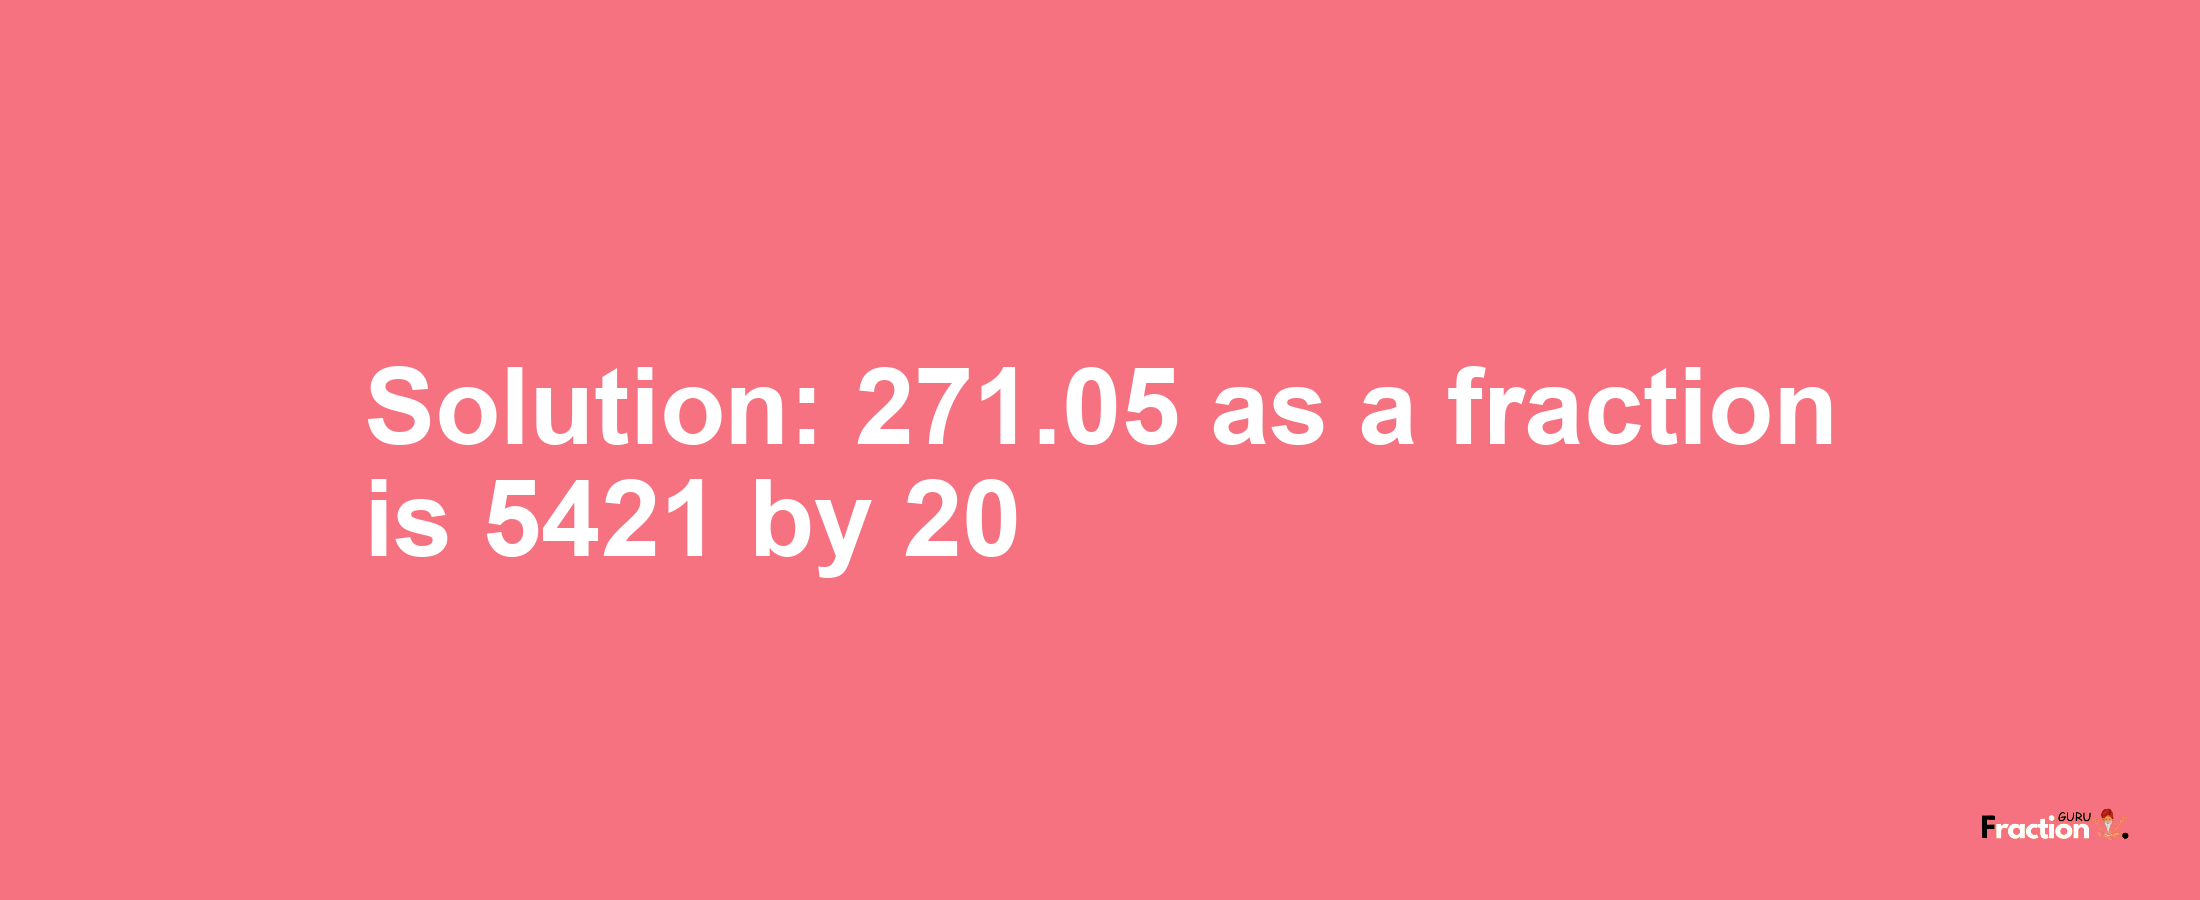 Solution:271.05 as a fraction is 5421/20